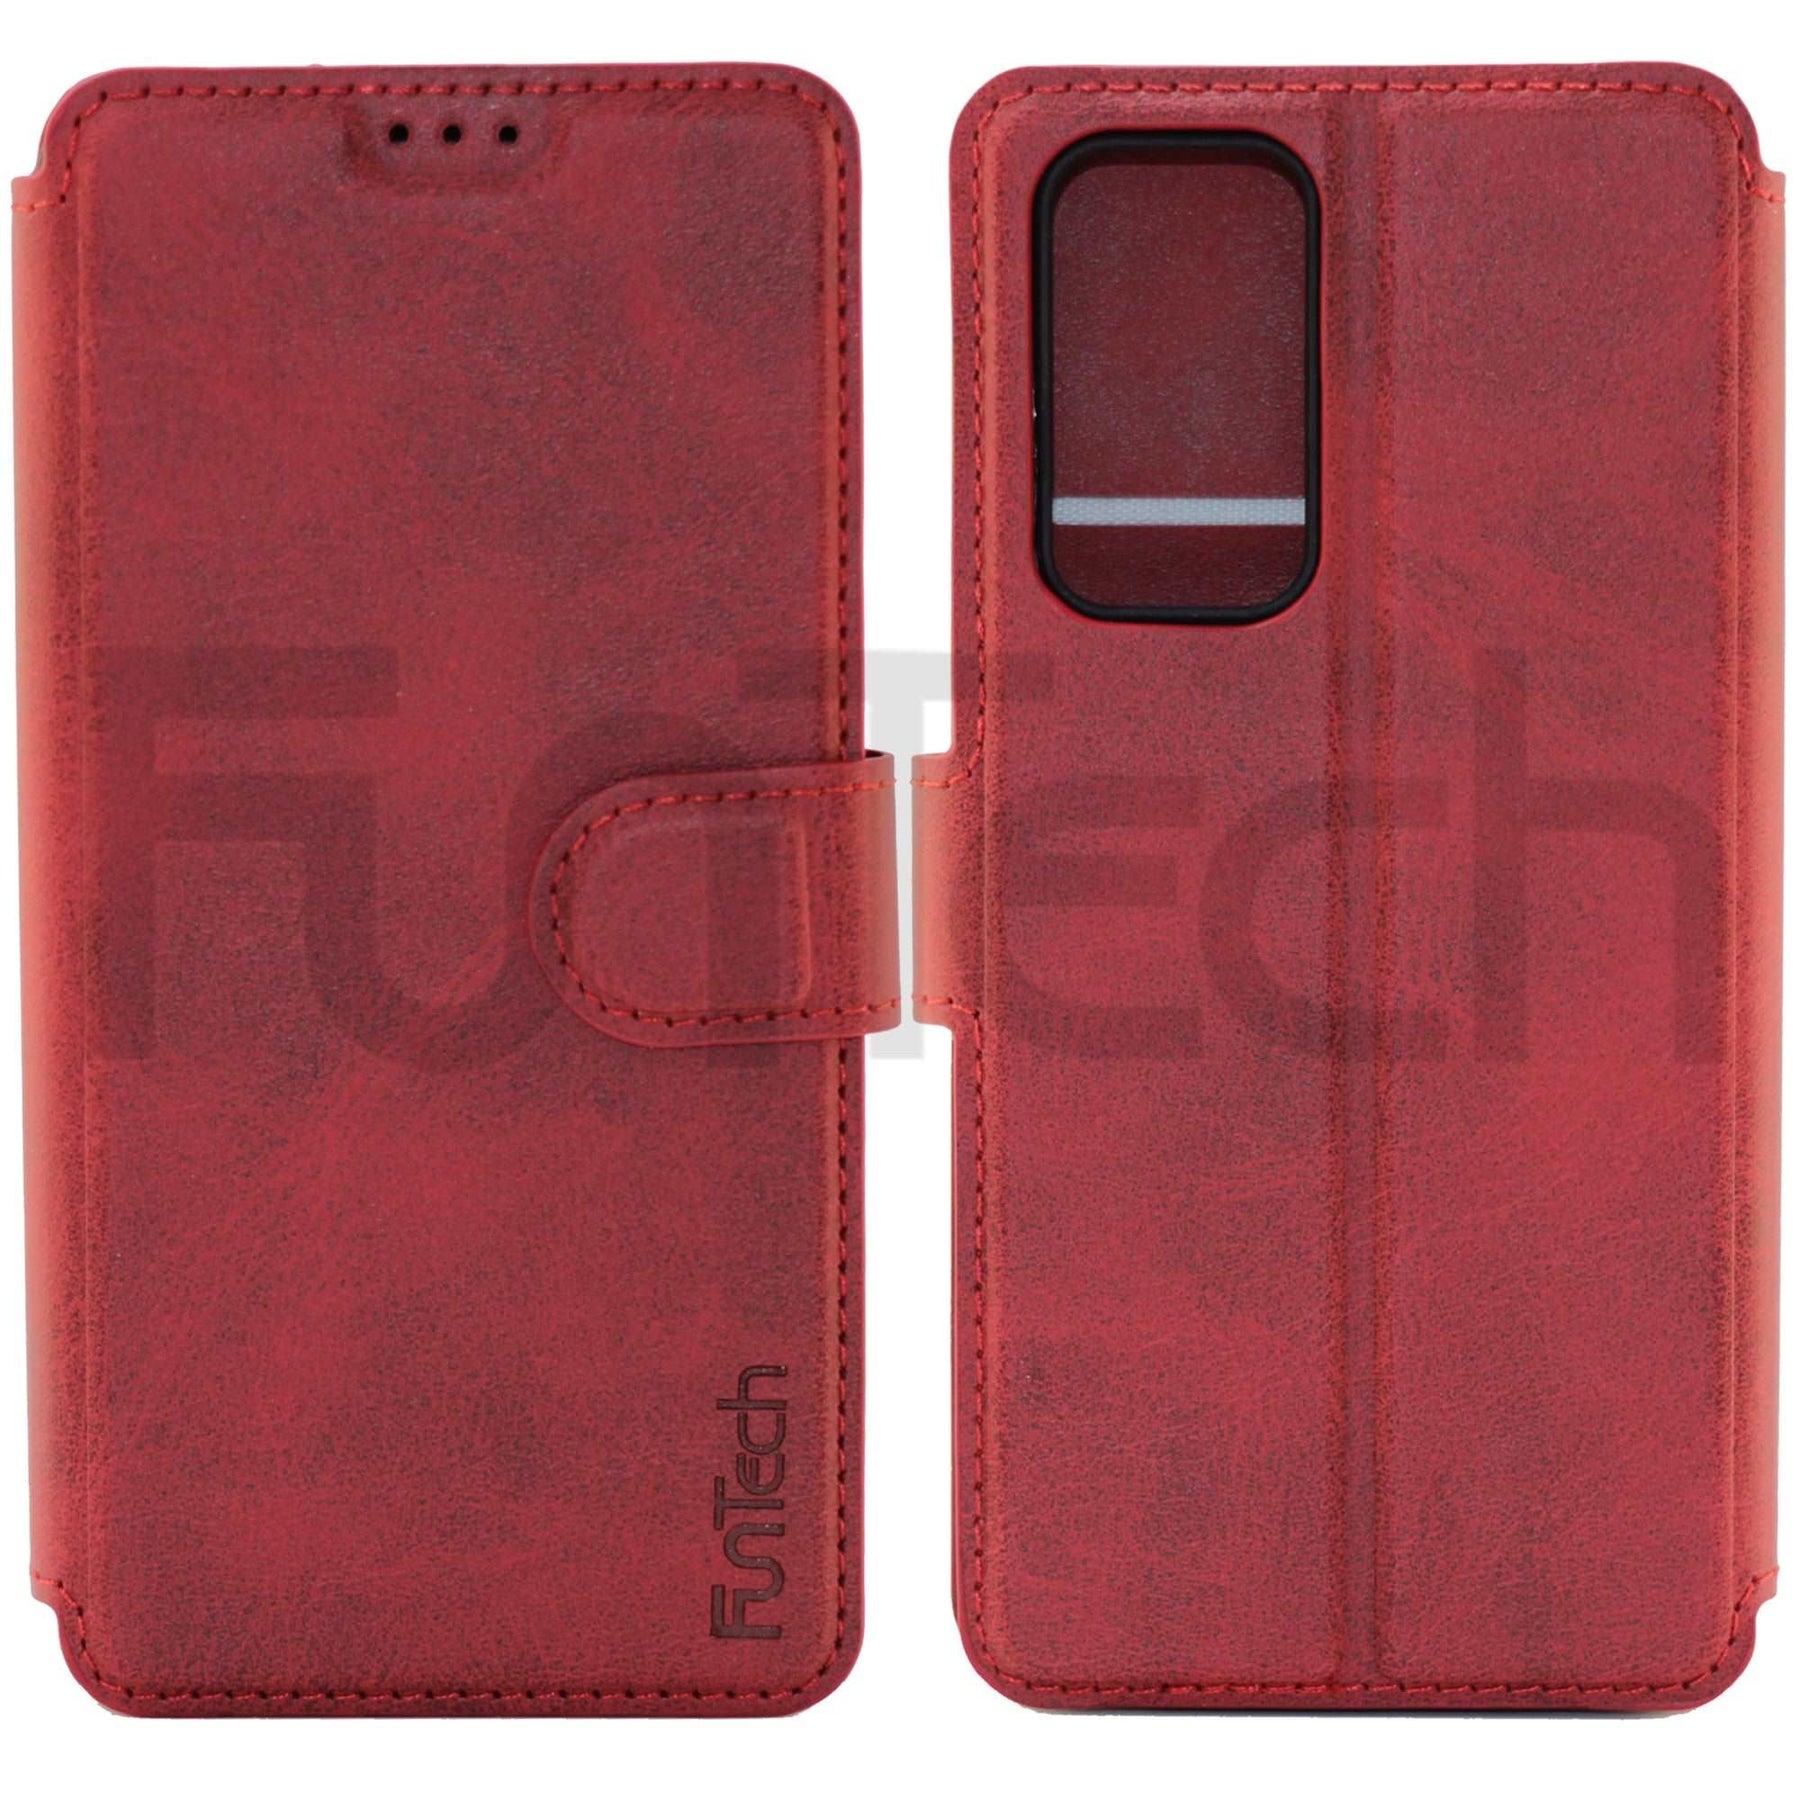 Huawei P40, Leather Wallet Case, Color Red,